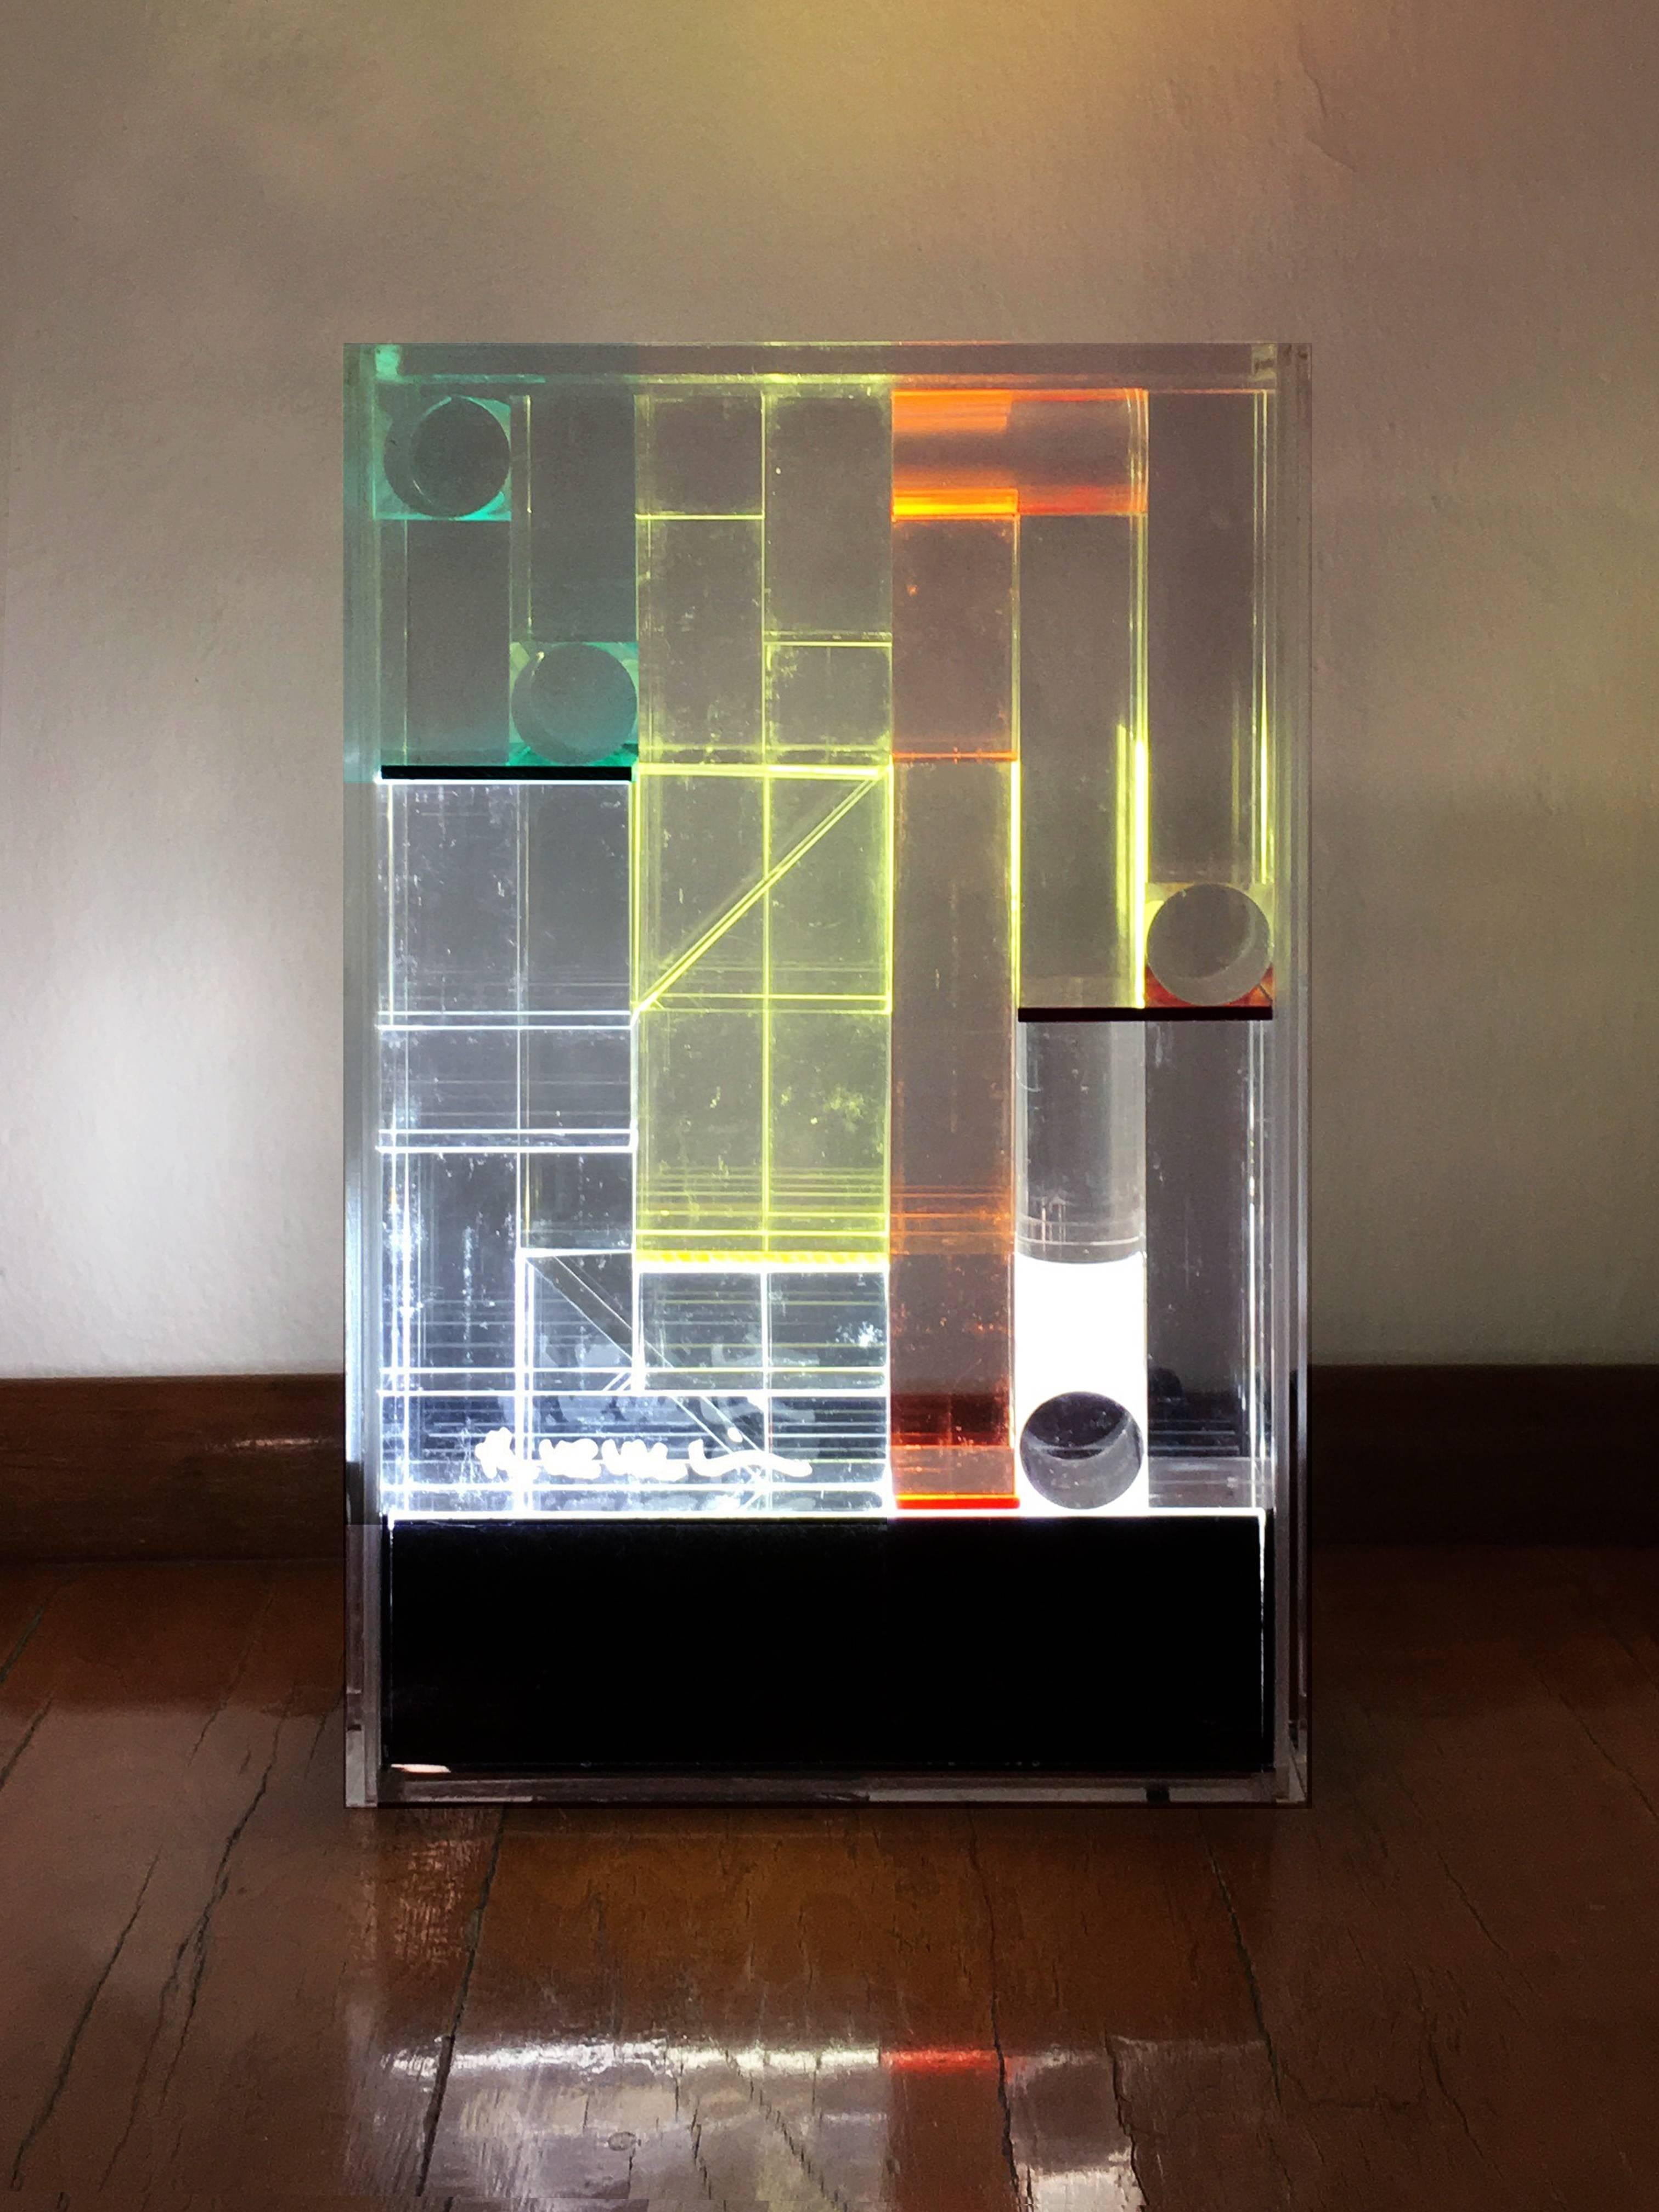 Lamp in methacrylate with light-box base, set of colored filters and clear prisms with different arrangement. Designed for Lamperti. Possible to verify the position of prisms and filters and obtain the effect of lights and colors.

Lamp: